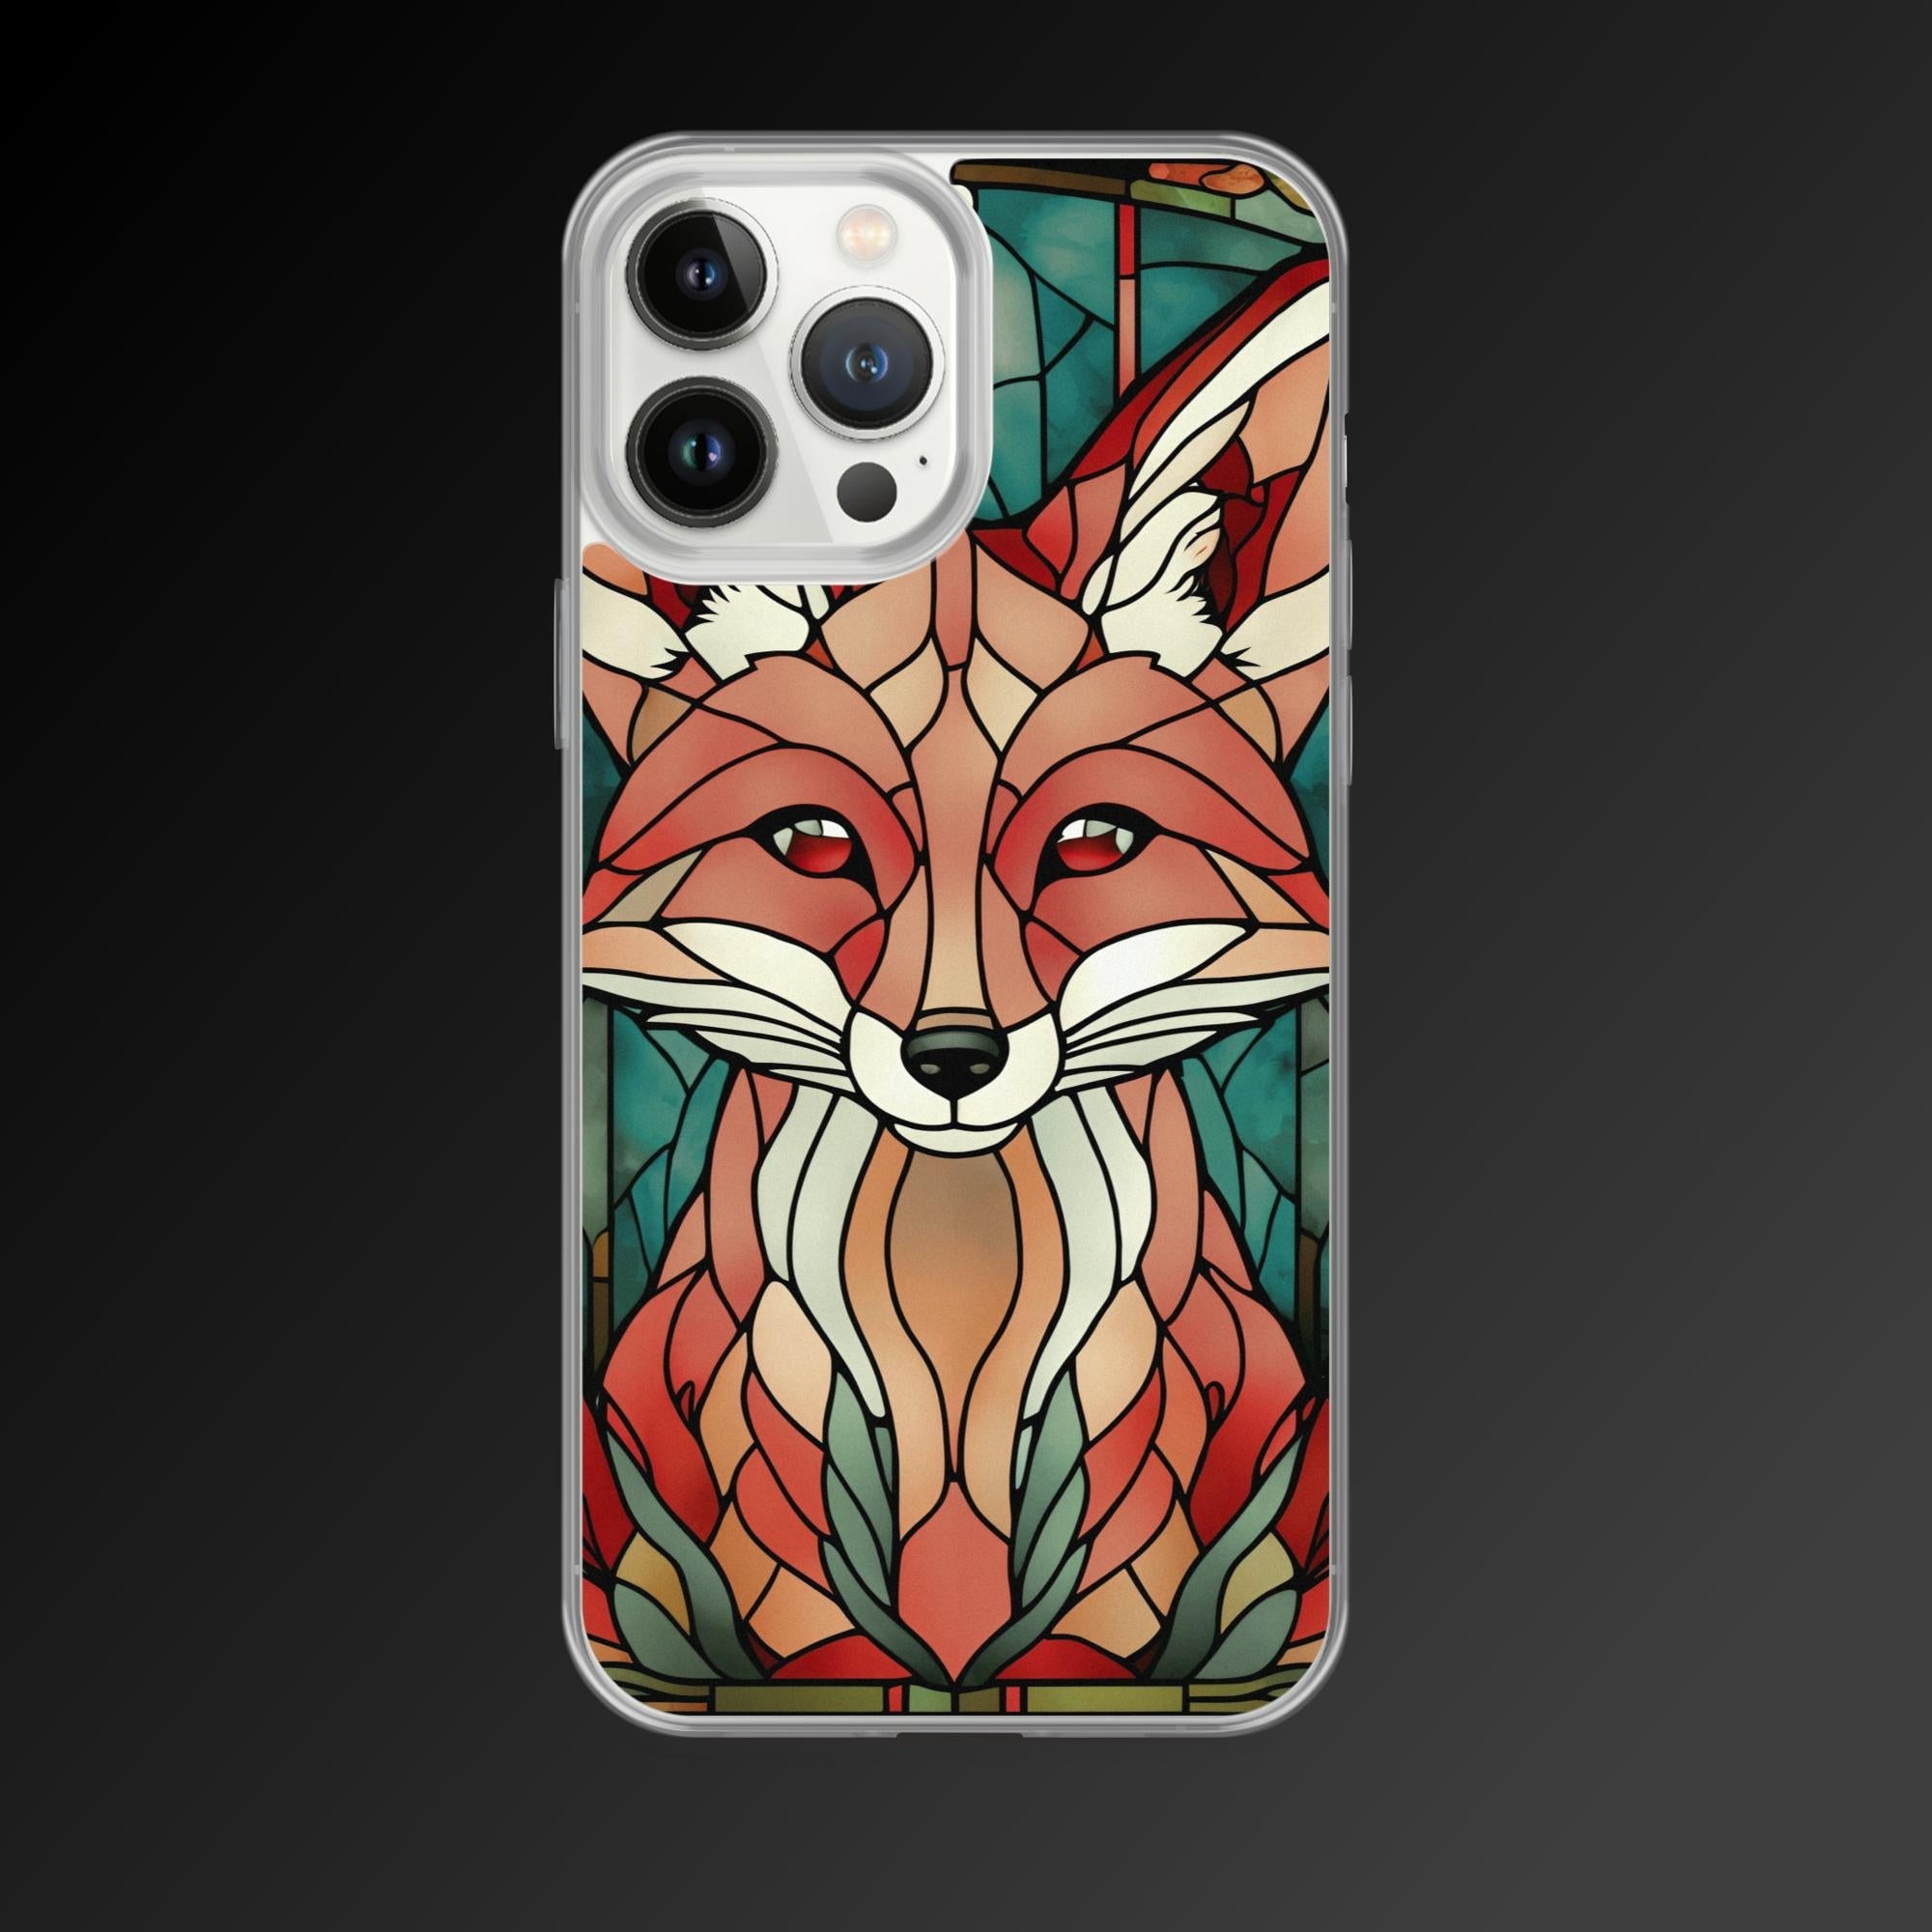 "Flaming fox" clear iphone case - Clear iphone case - Ever colorful